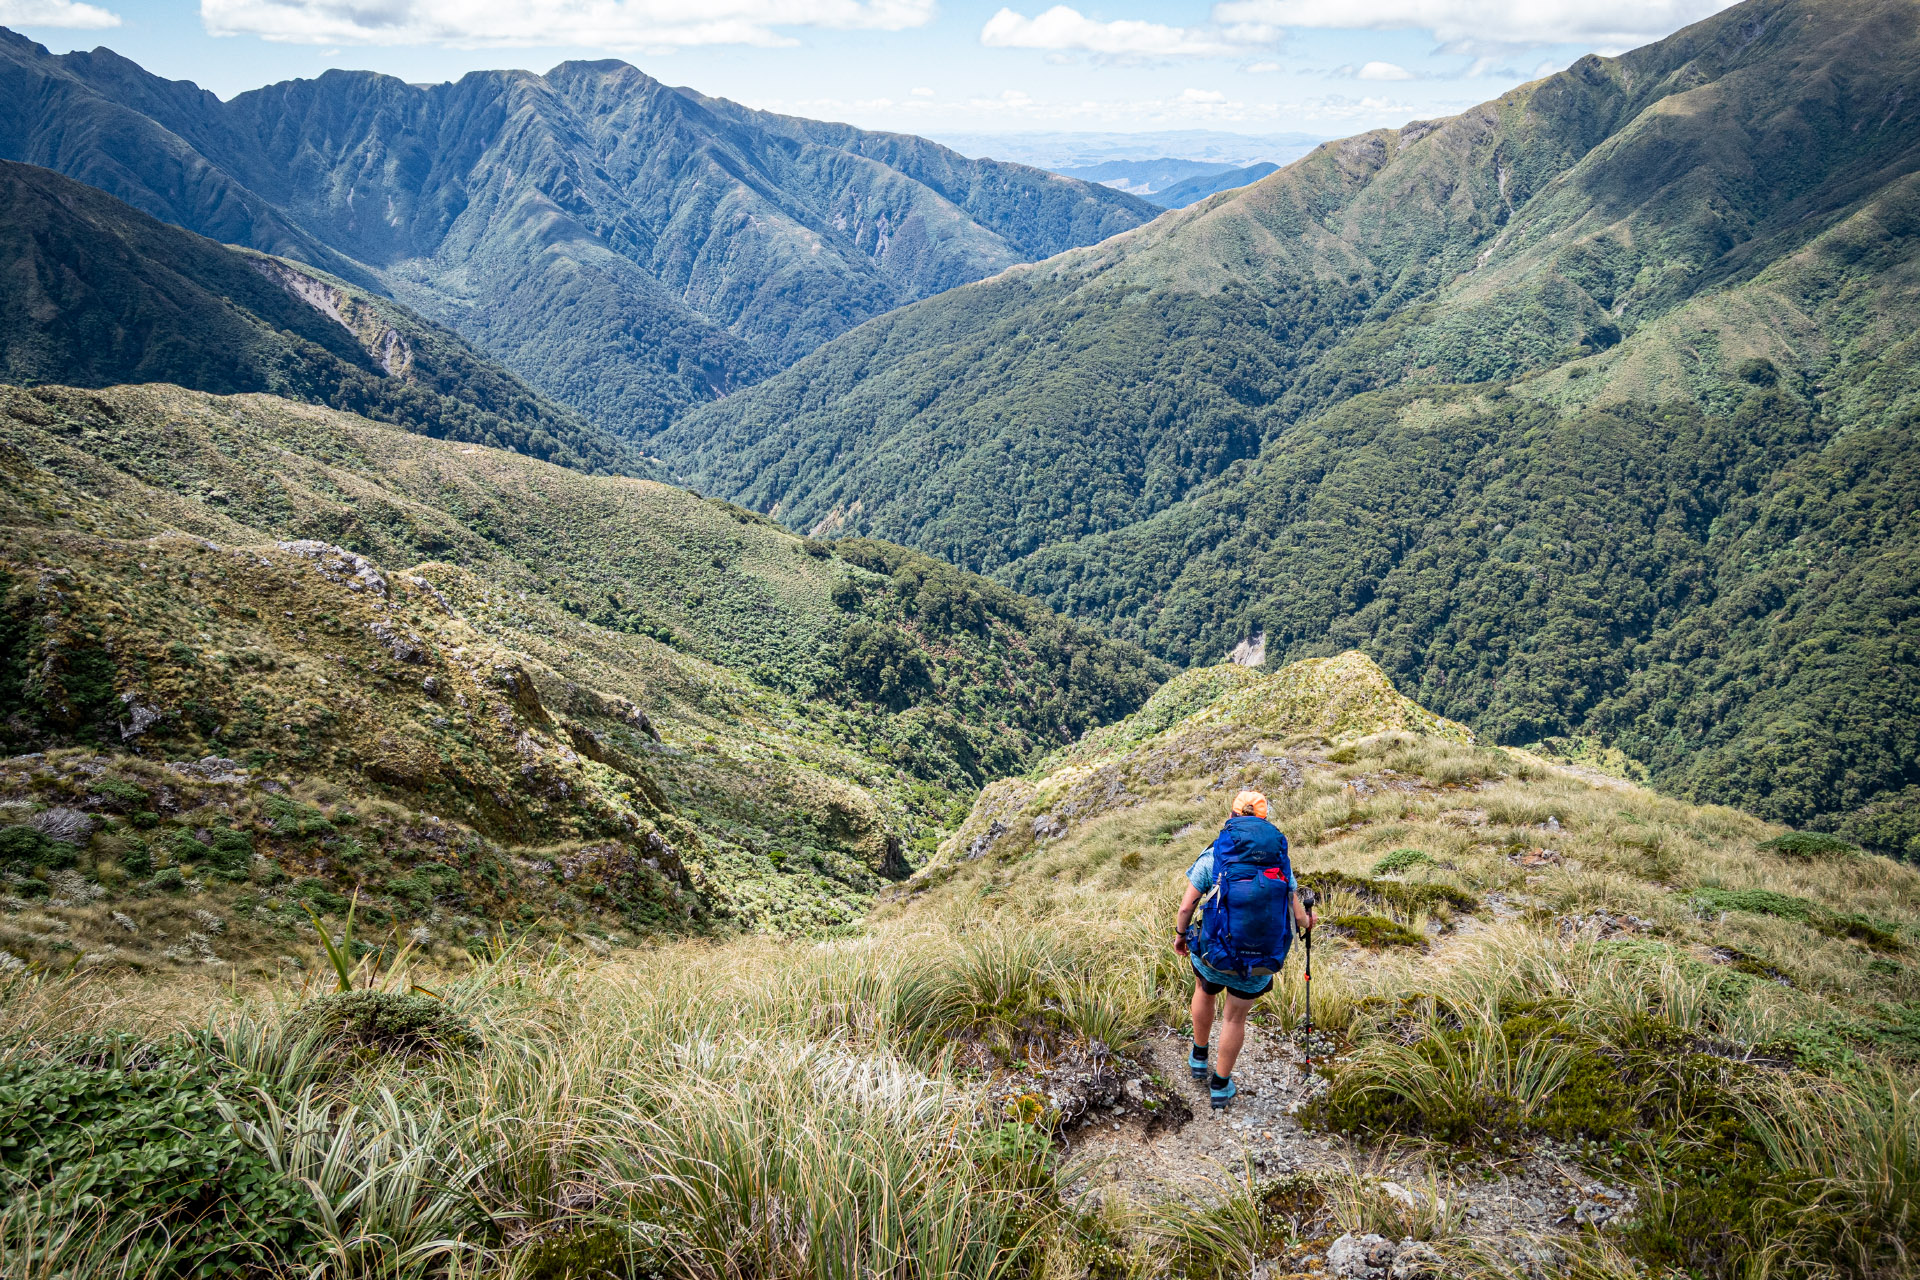 Starting down the spur into the Waingawa River from Pt 1313 on Tarn Ridge